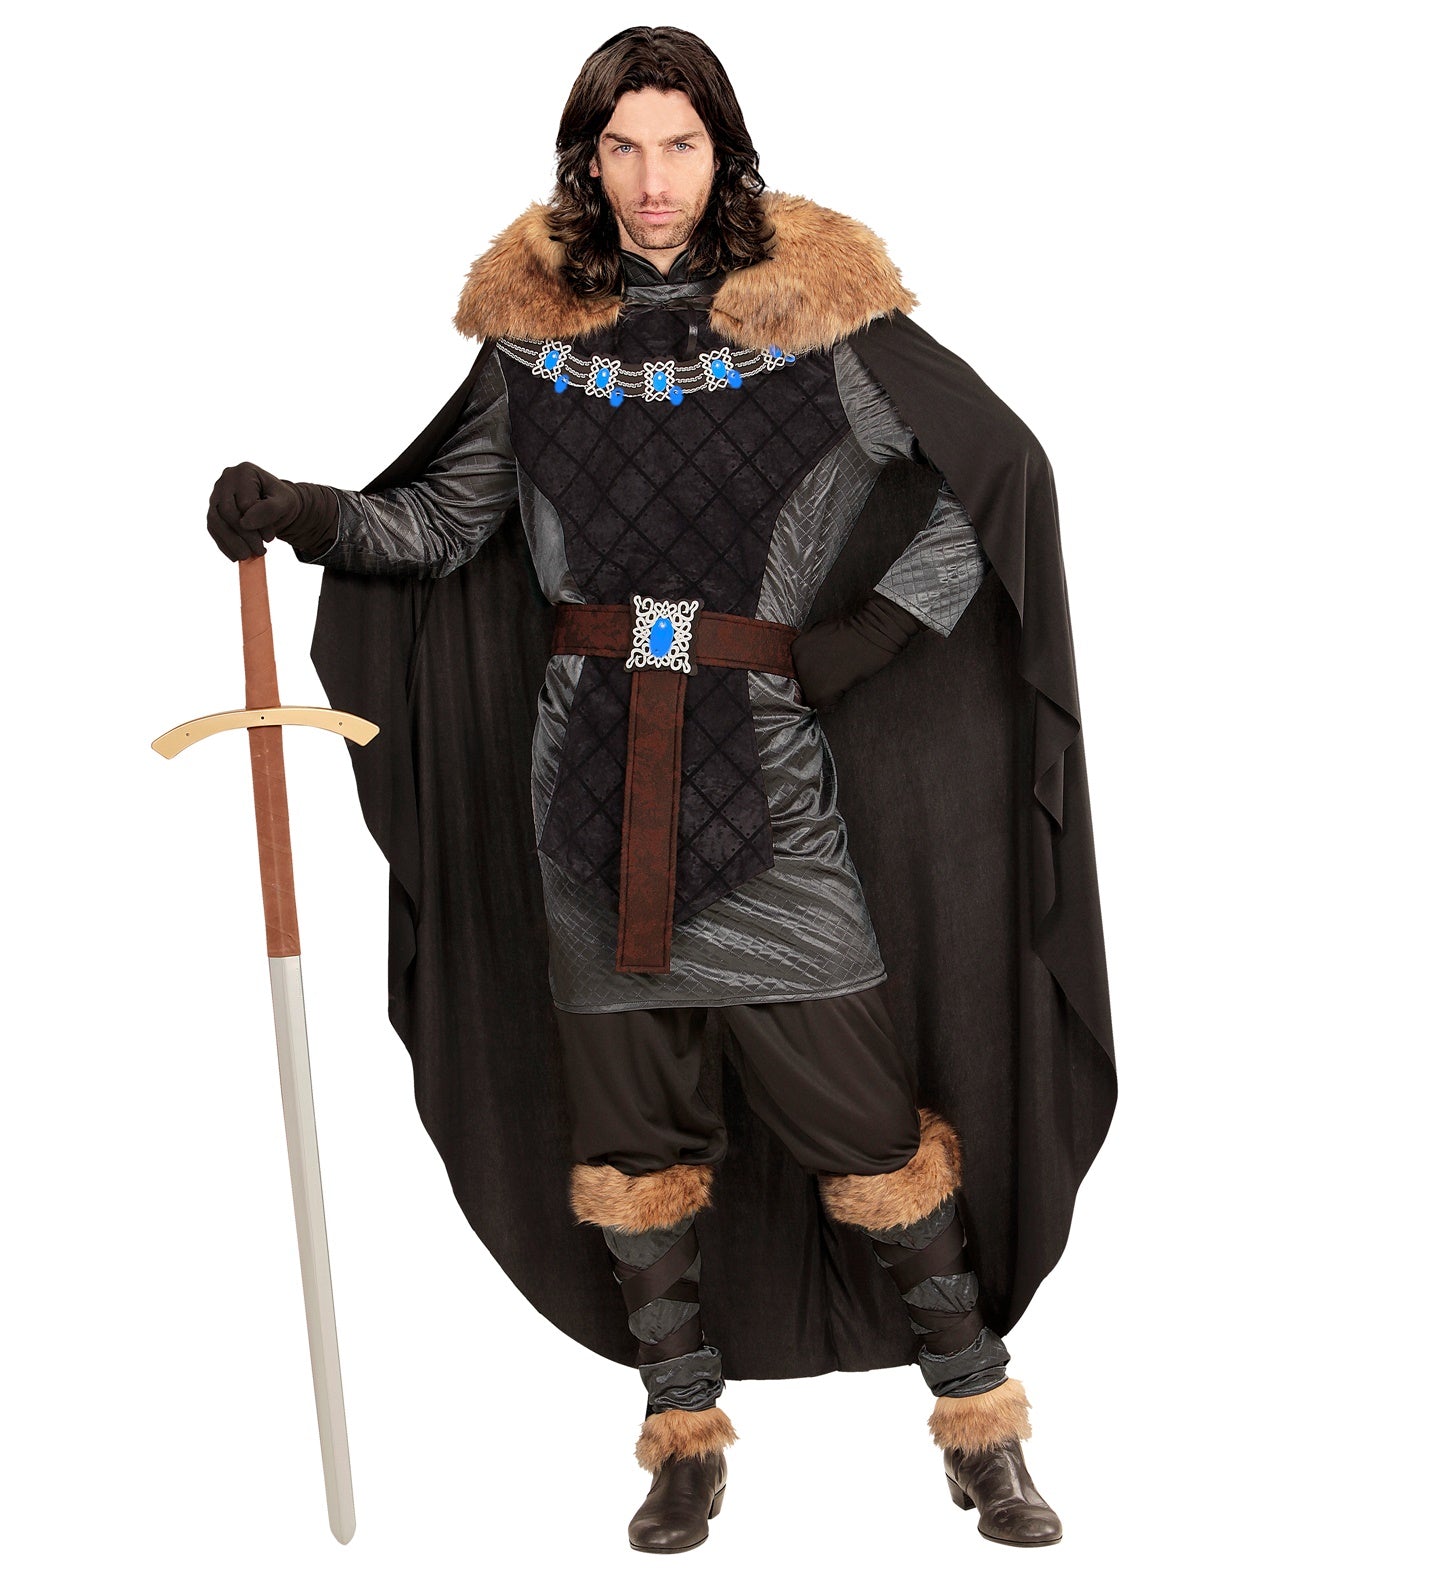 Deluxe Medieval Prince Costume